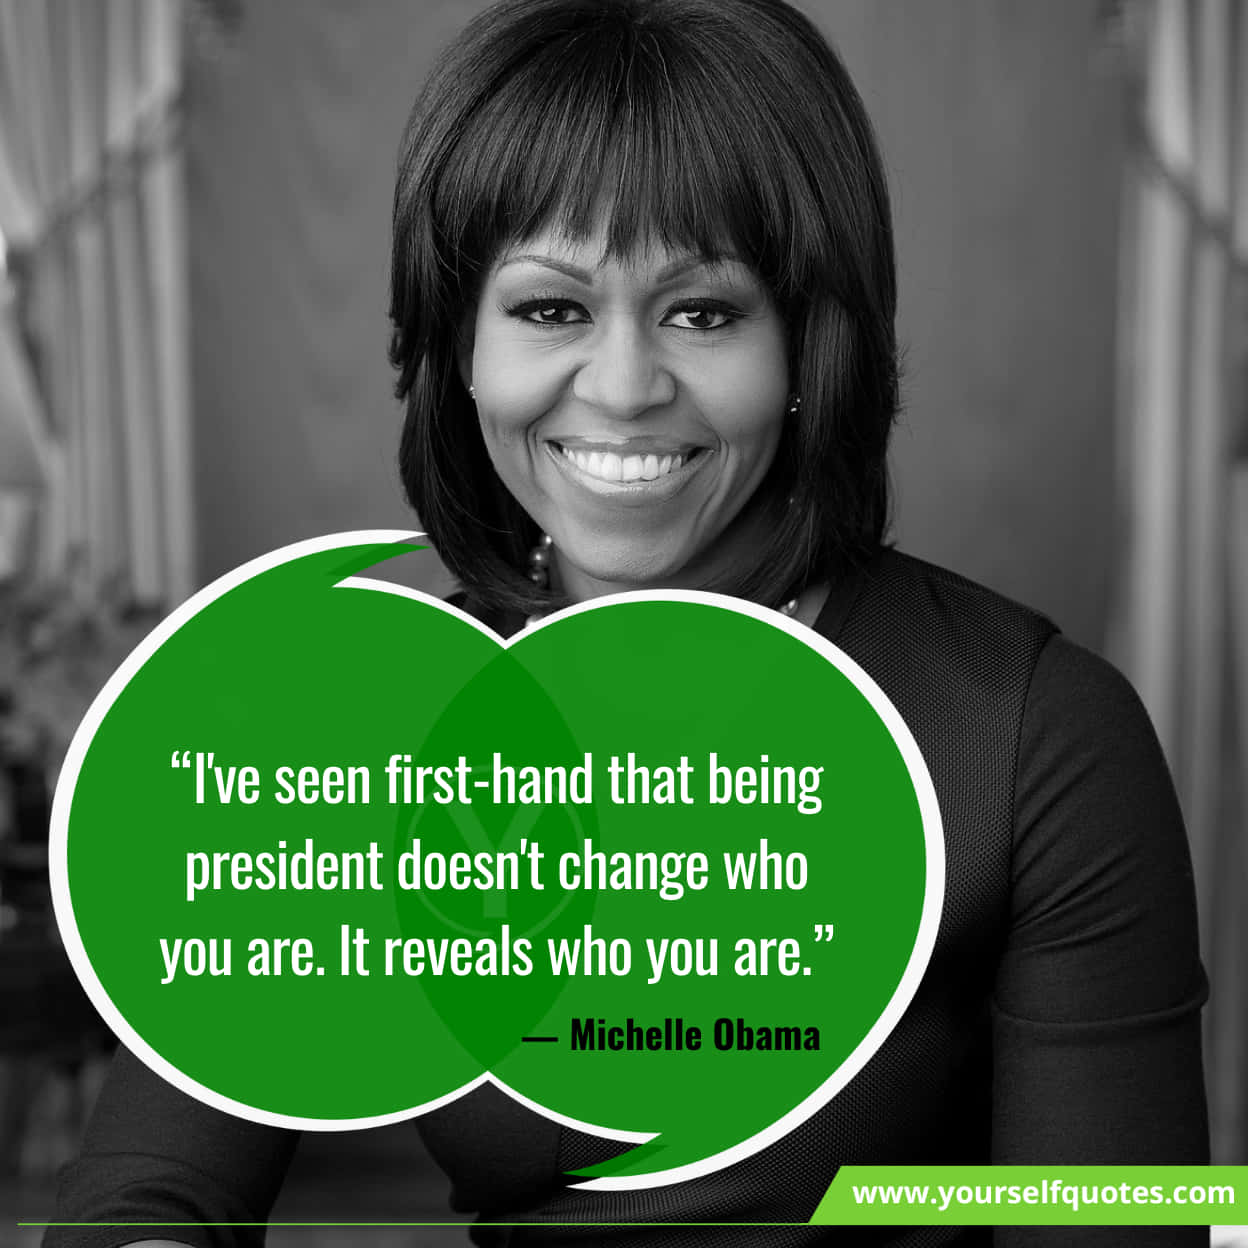 Michelle Obama Quotes About Women